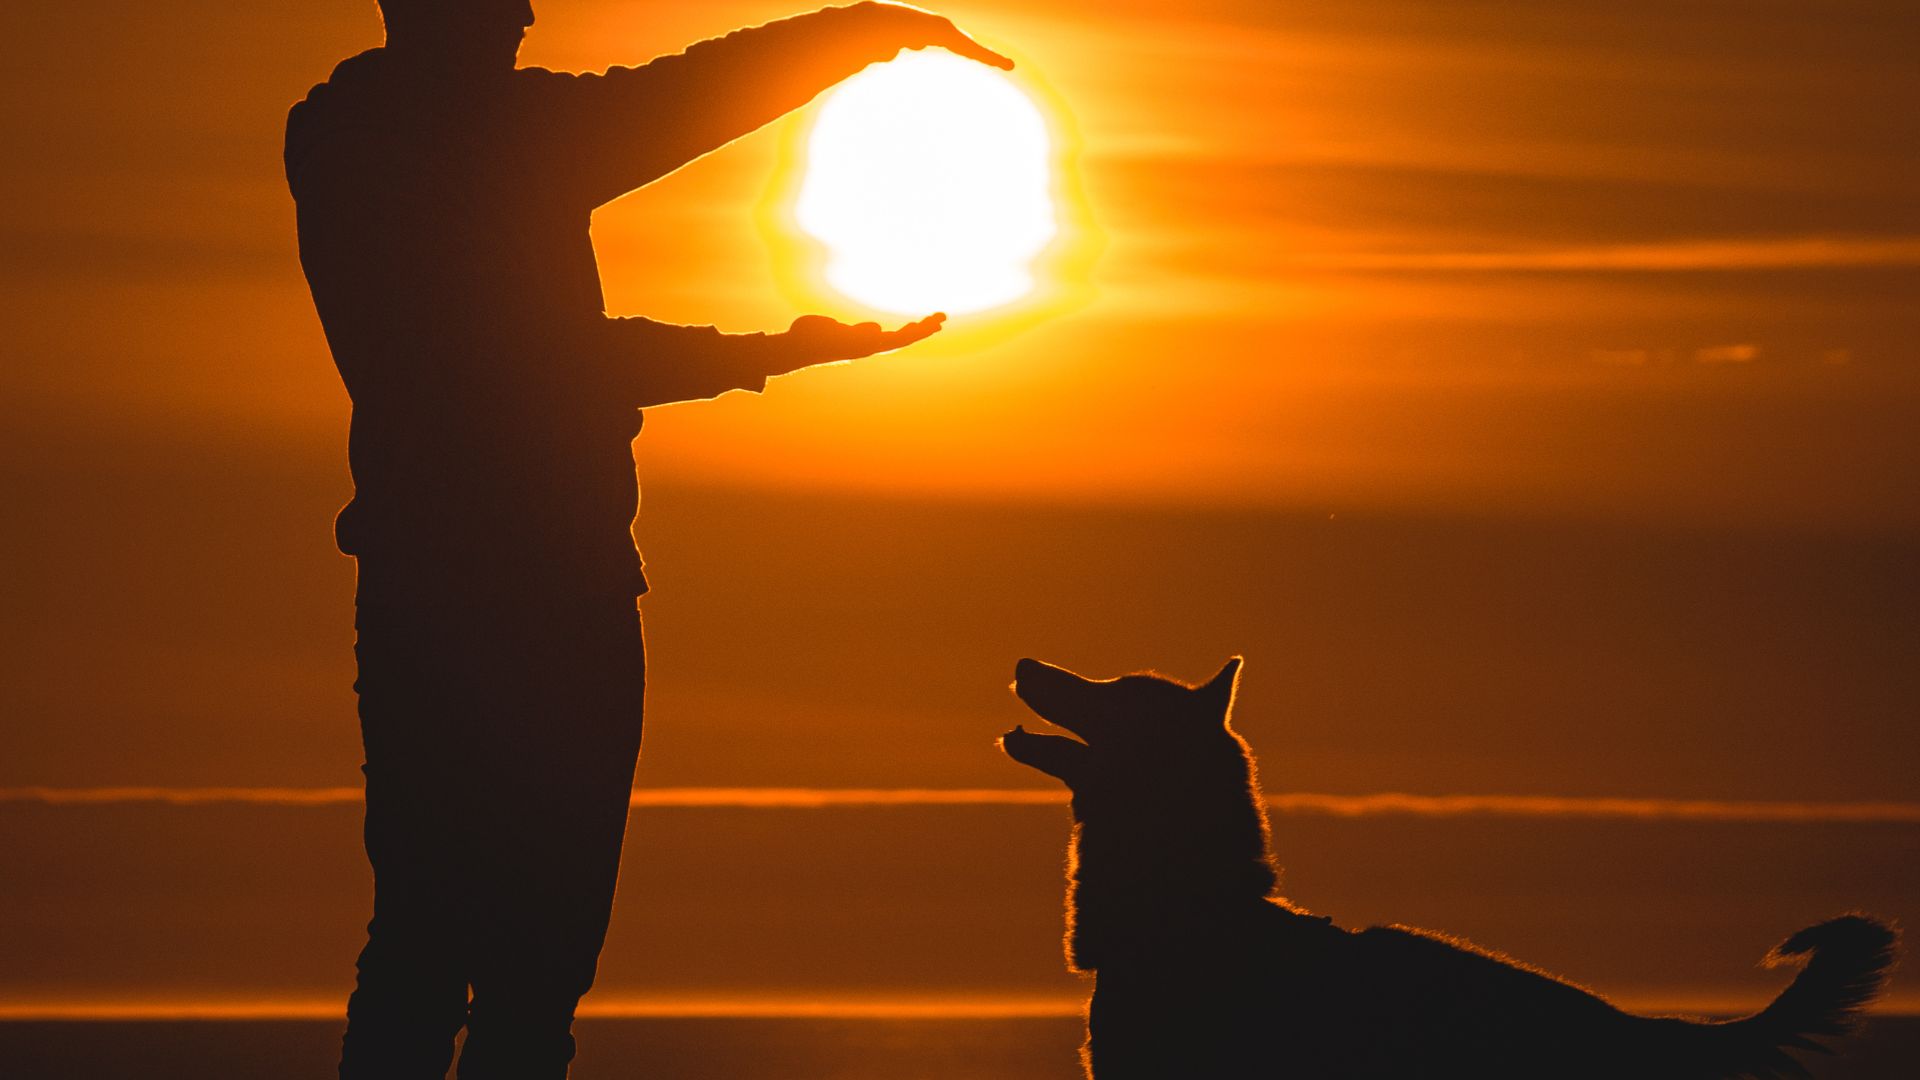 Silhouette of Man and Dog During Sunset